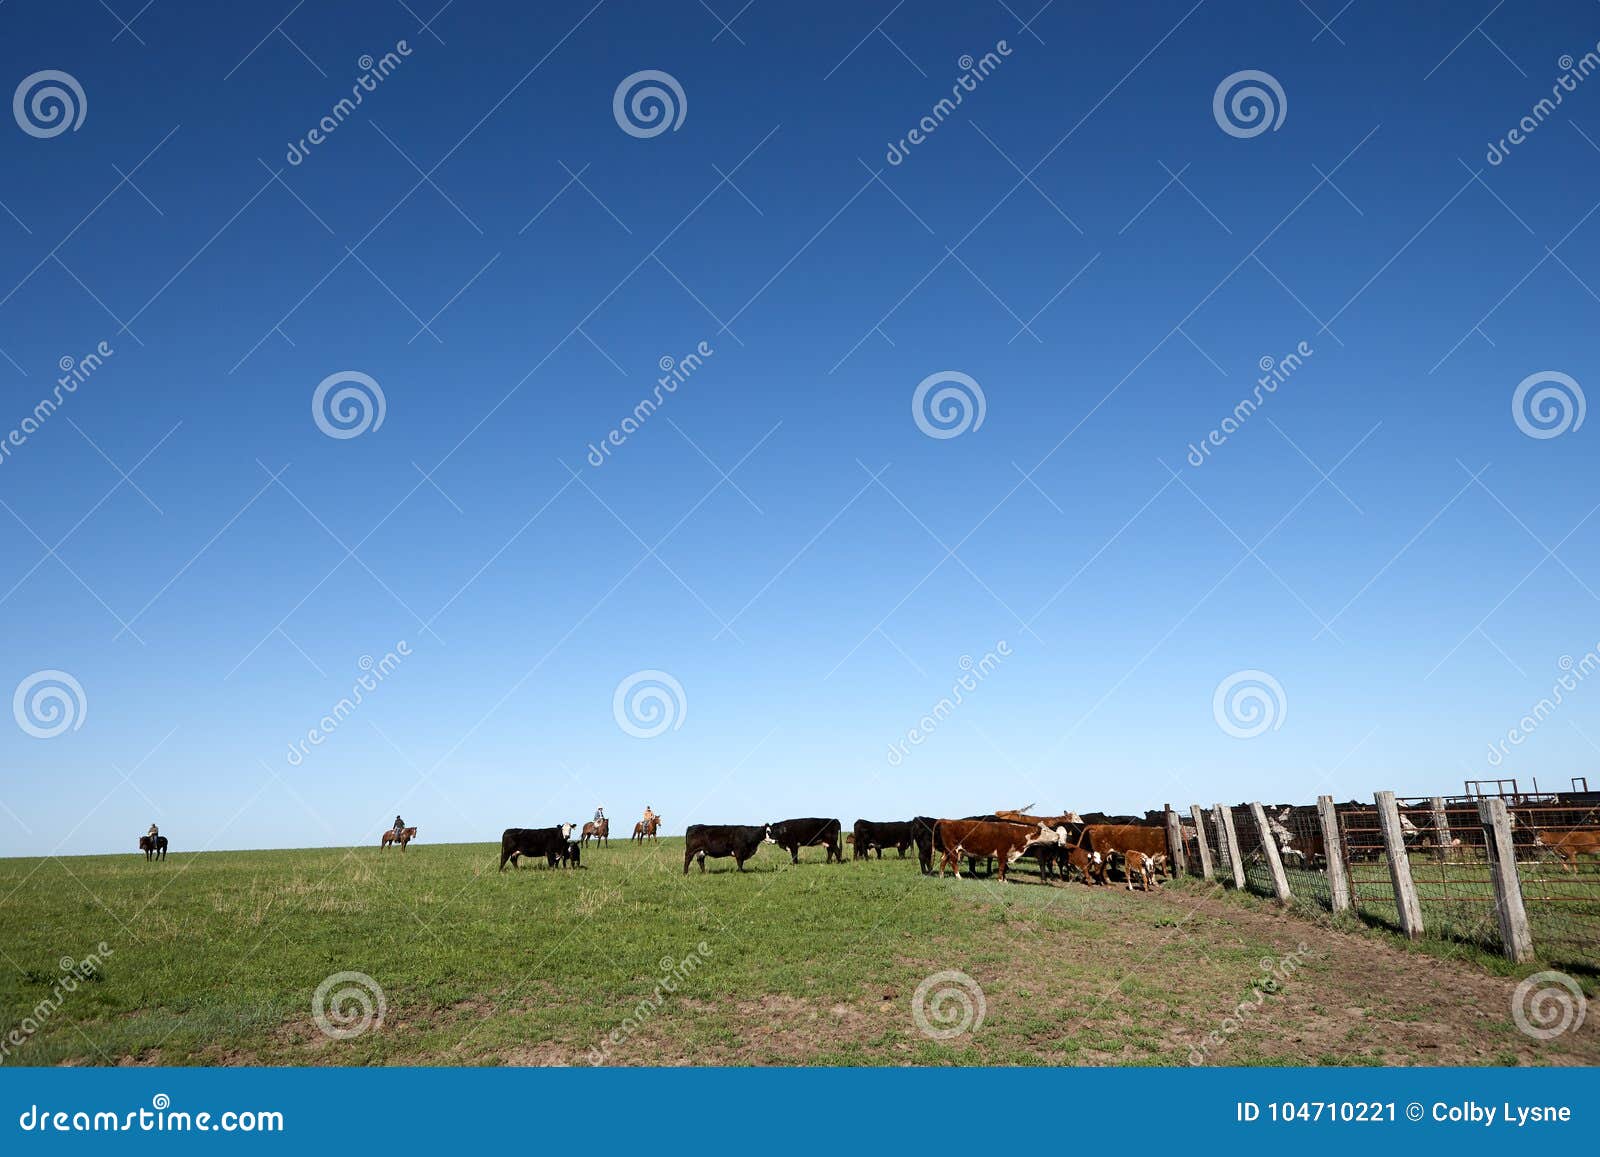 herd of cattle in a flat pasture with fence